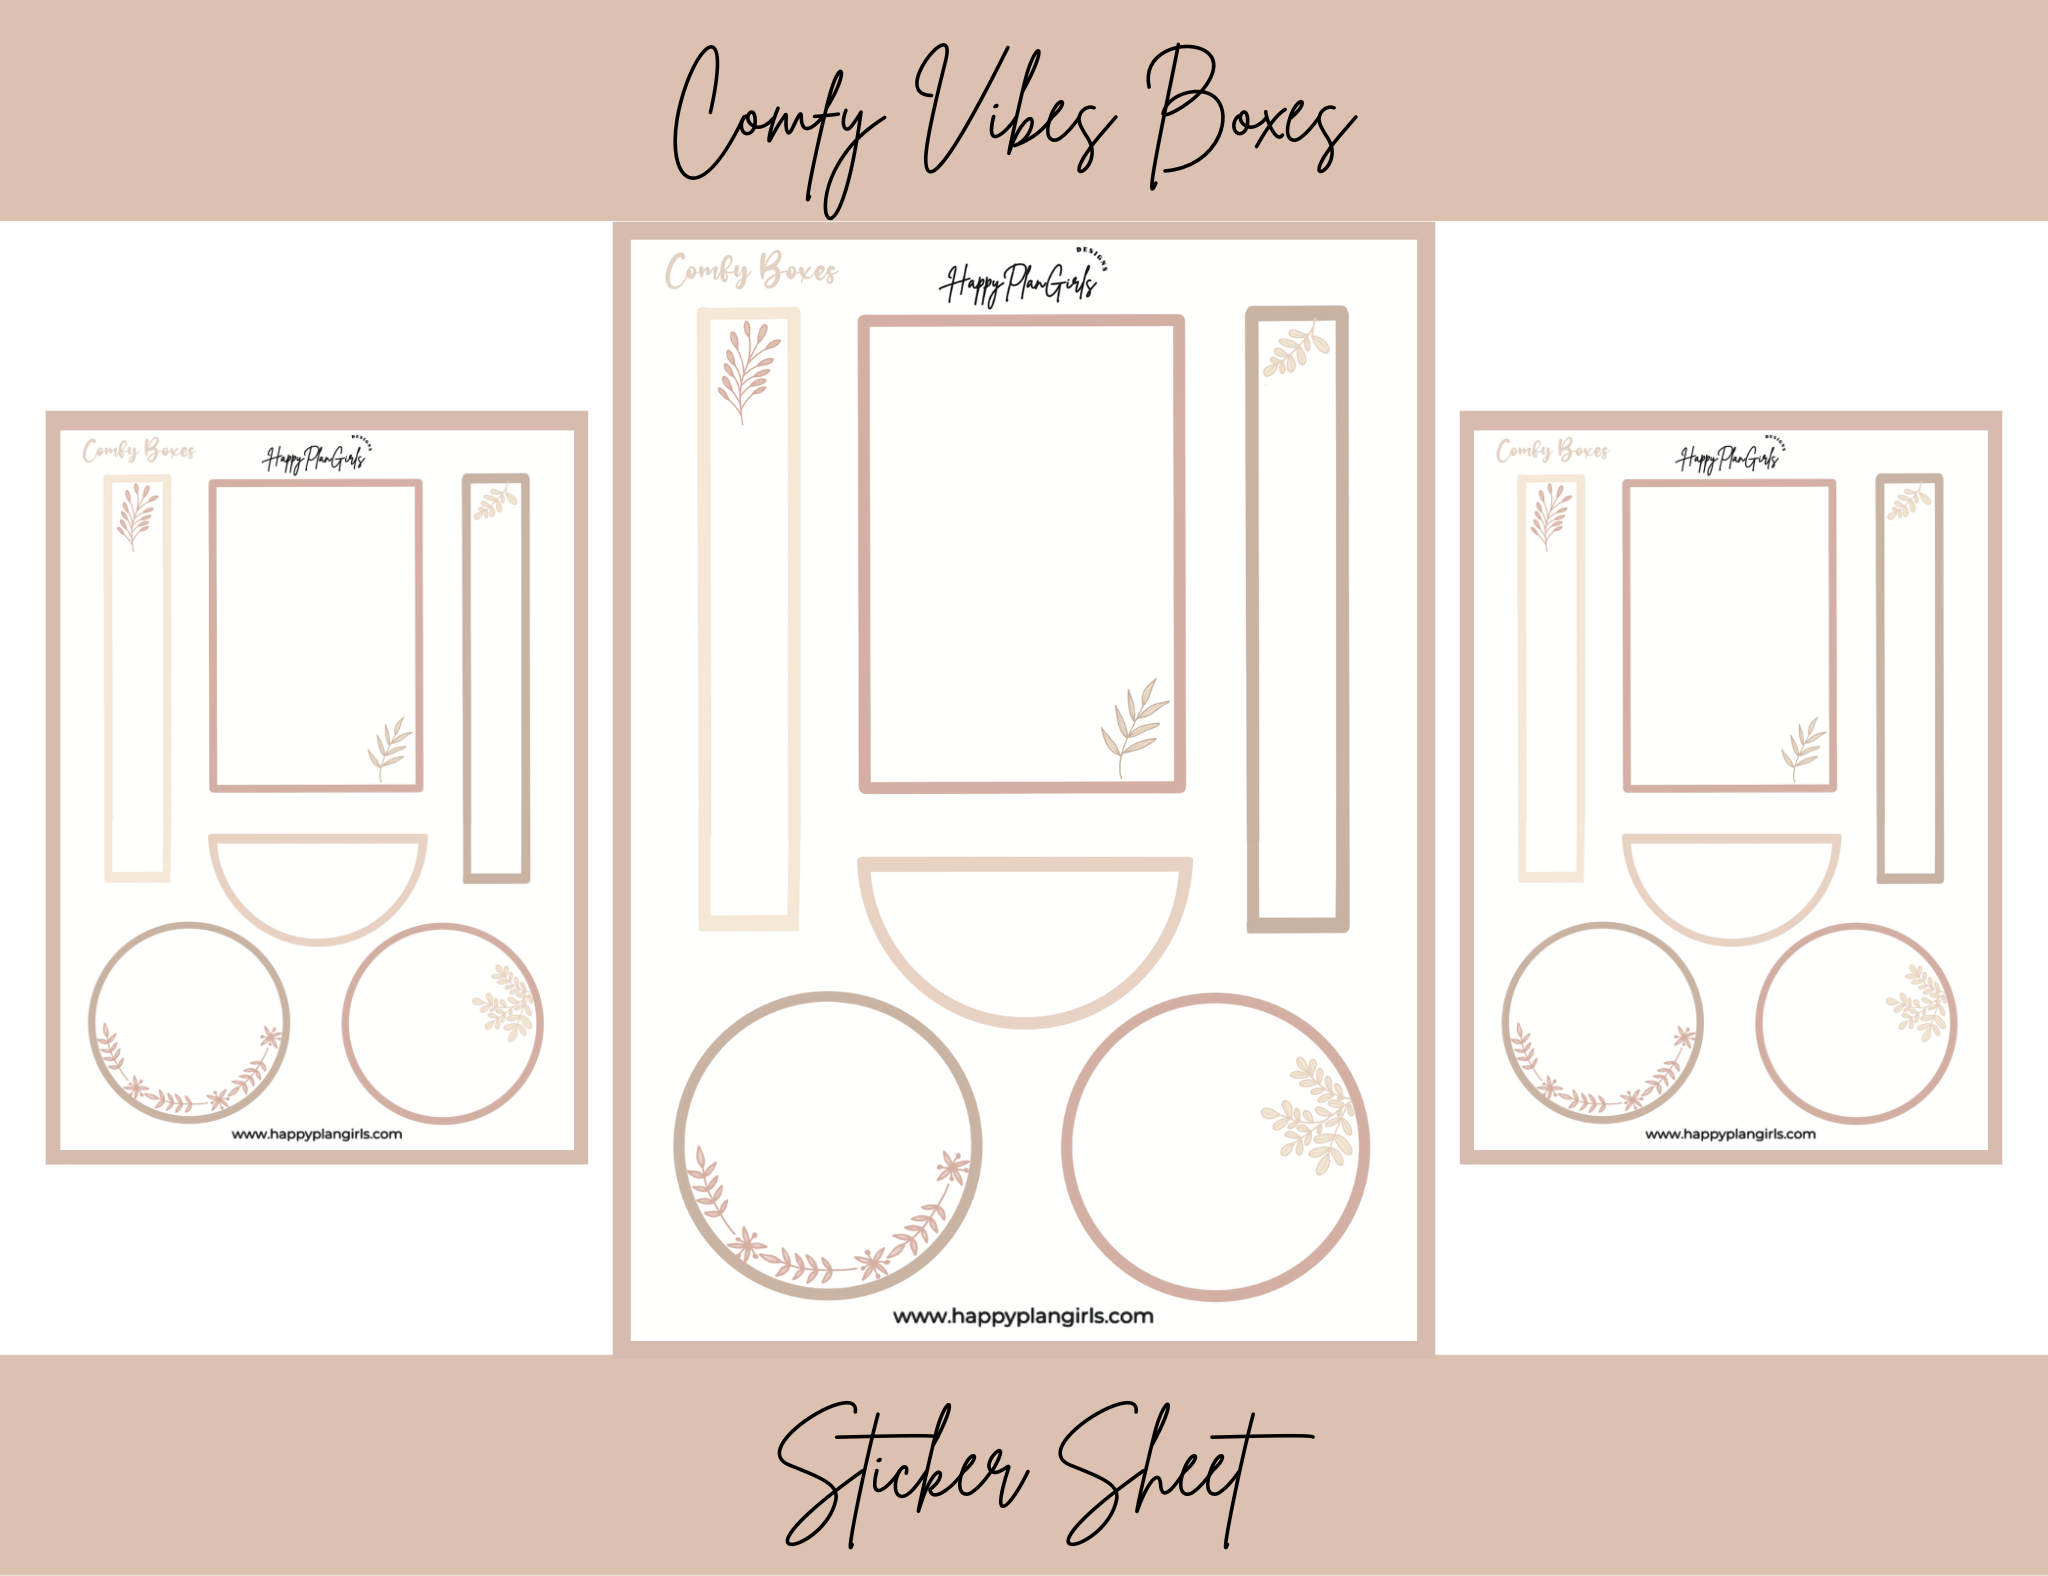 Comfy Vibes Boxes Sticker Sheet